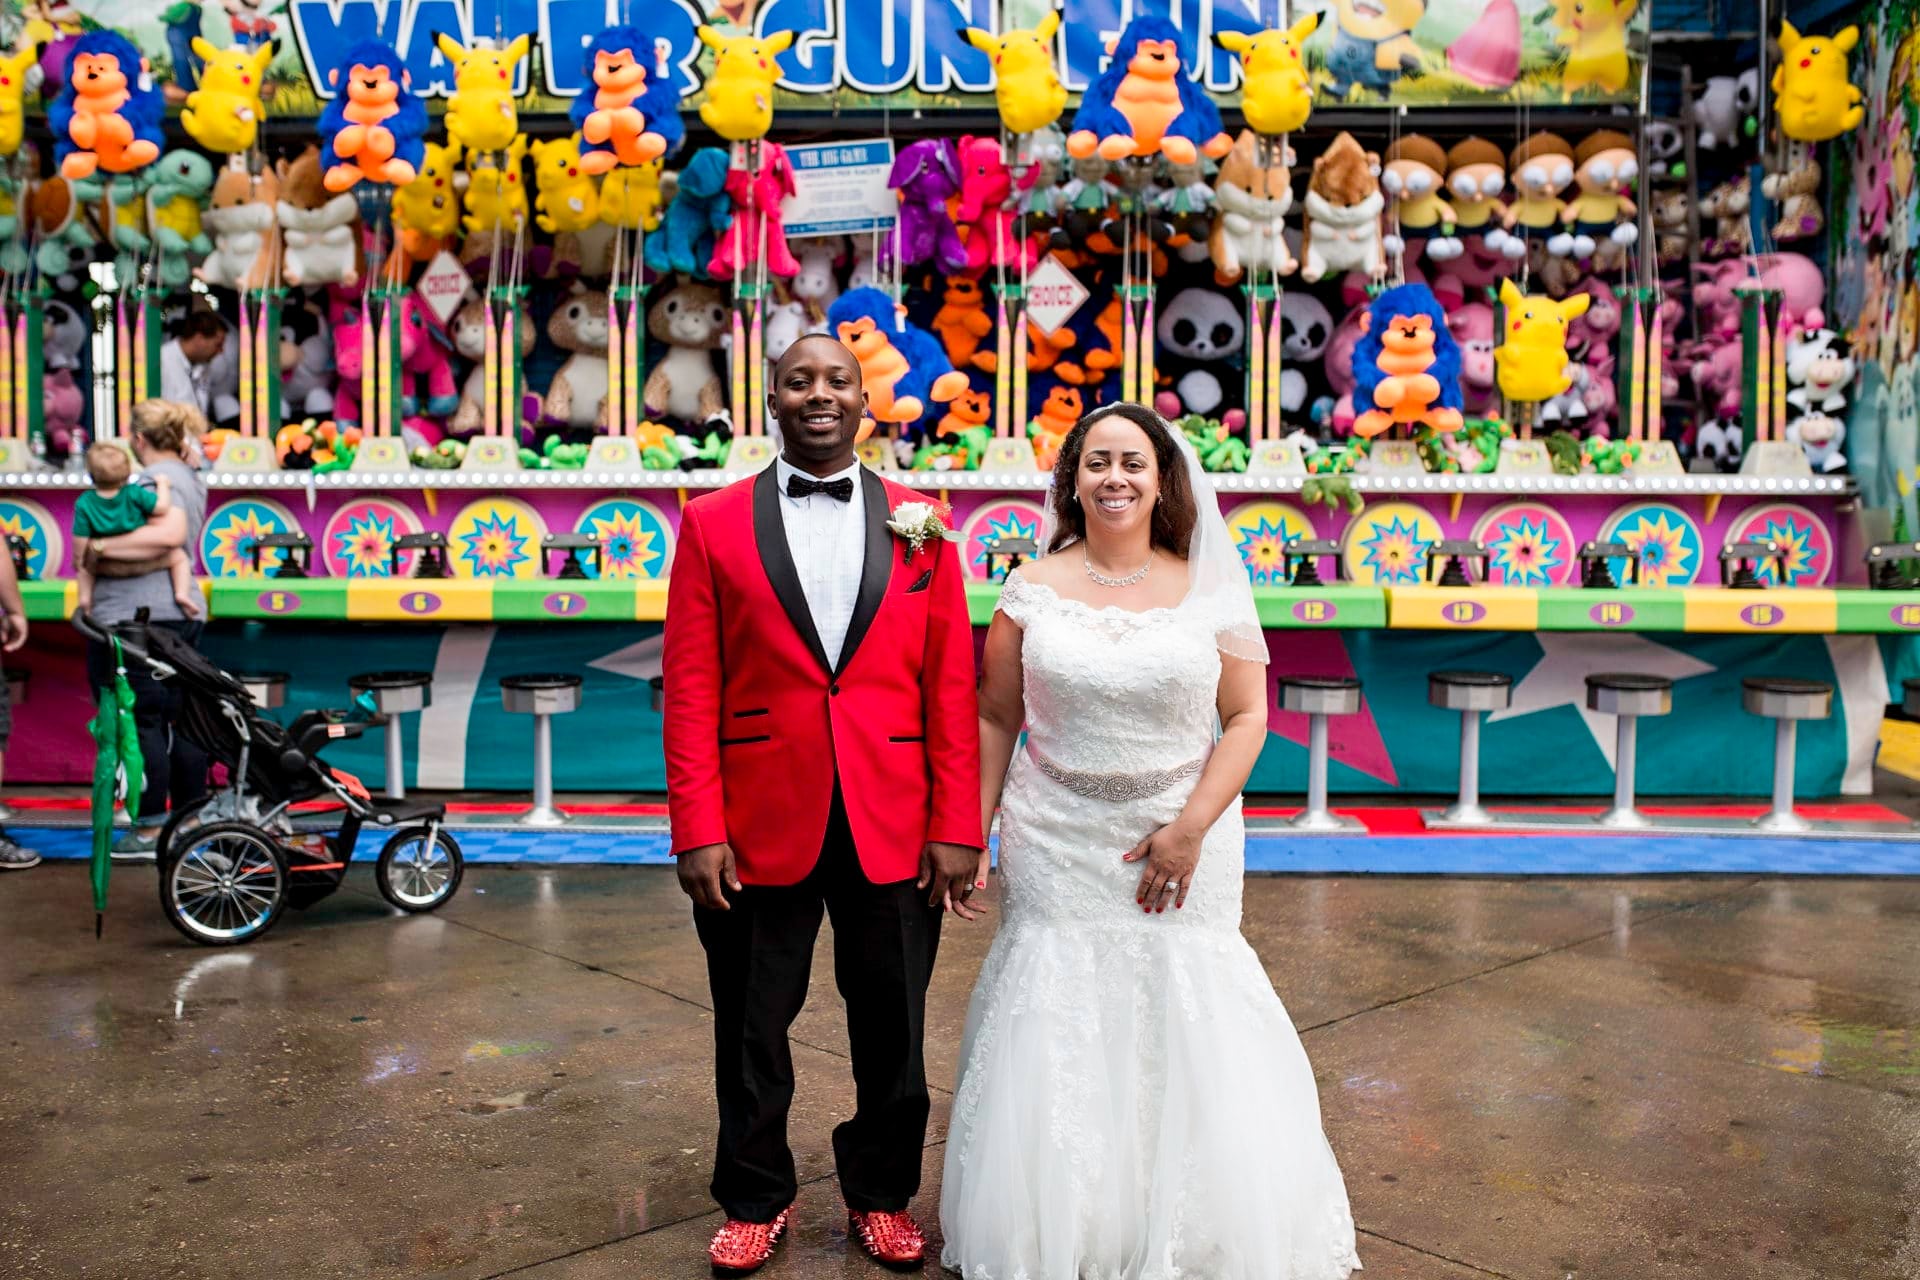 This Couple Started A Pop-Up Wedding Business To Help Brides and Grooms Wed Their Way